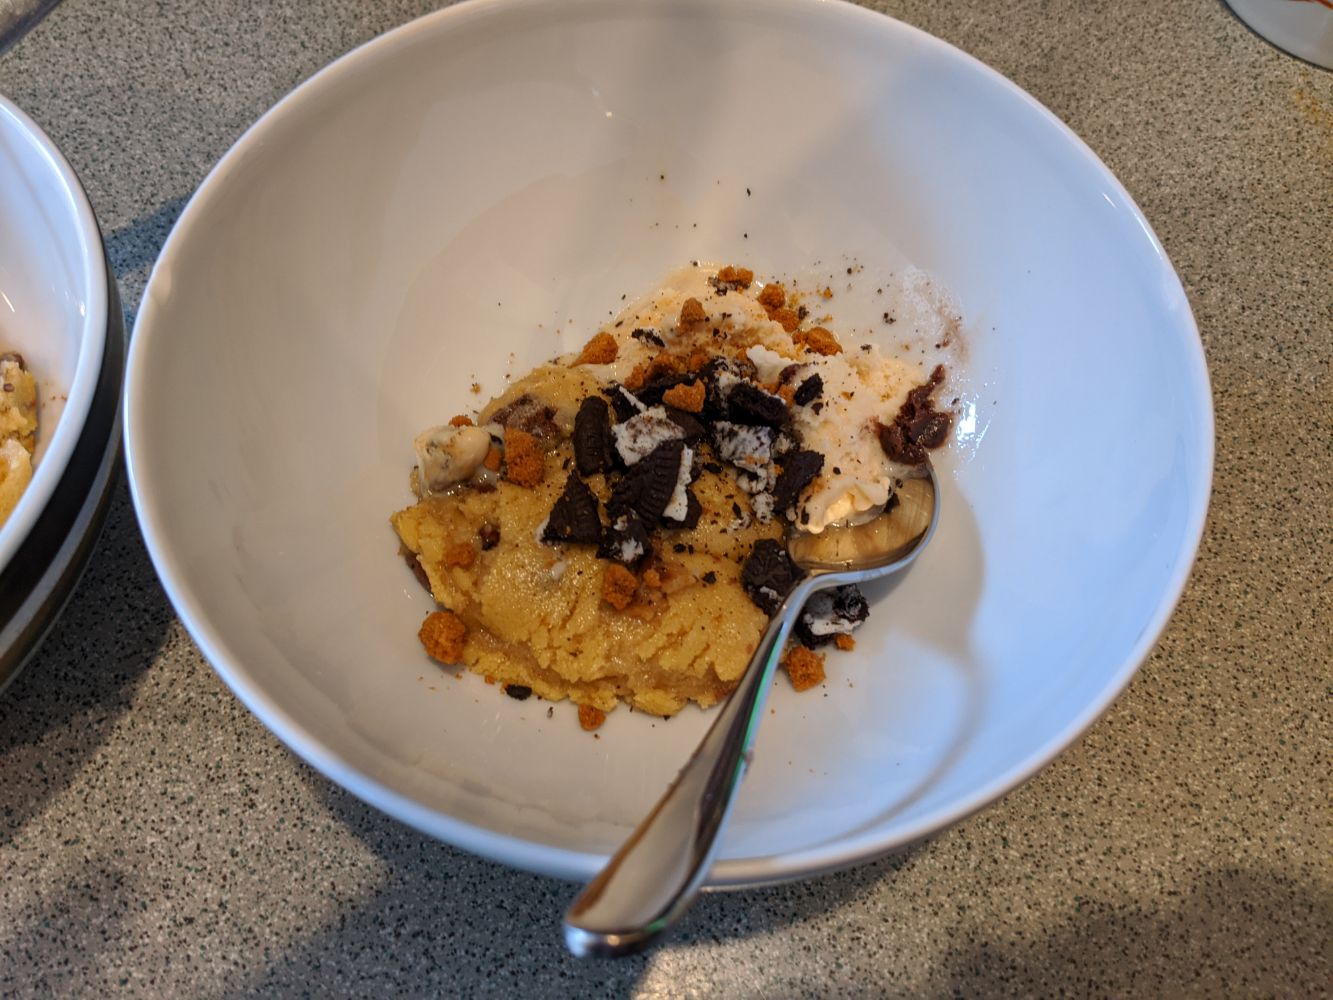 A bowl with half a cookie, a small scoop of ice cream, chunks of gingerbread and some broken up Oreo